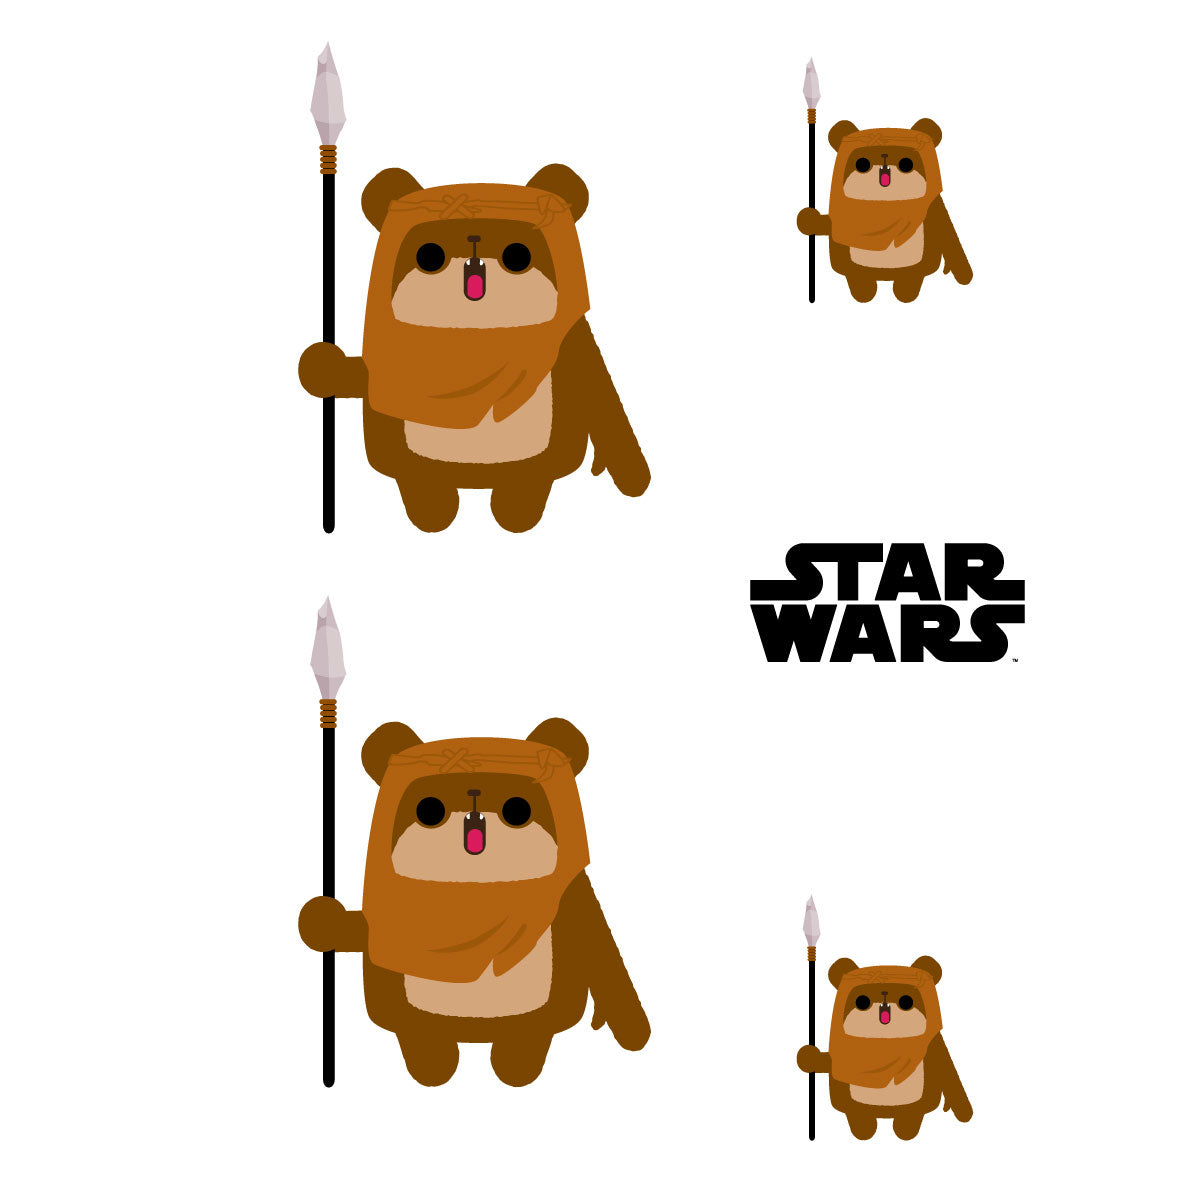 Sheet of 5 -EWOK Minis        - Officially Licensed Star Wars Removable    Adhesive Decal